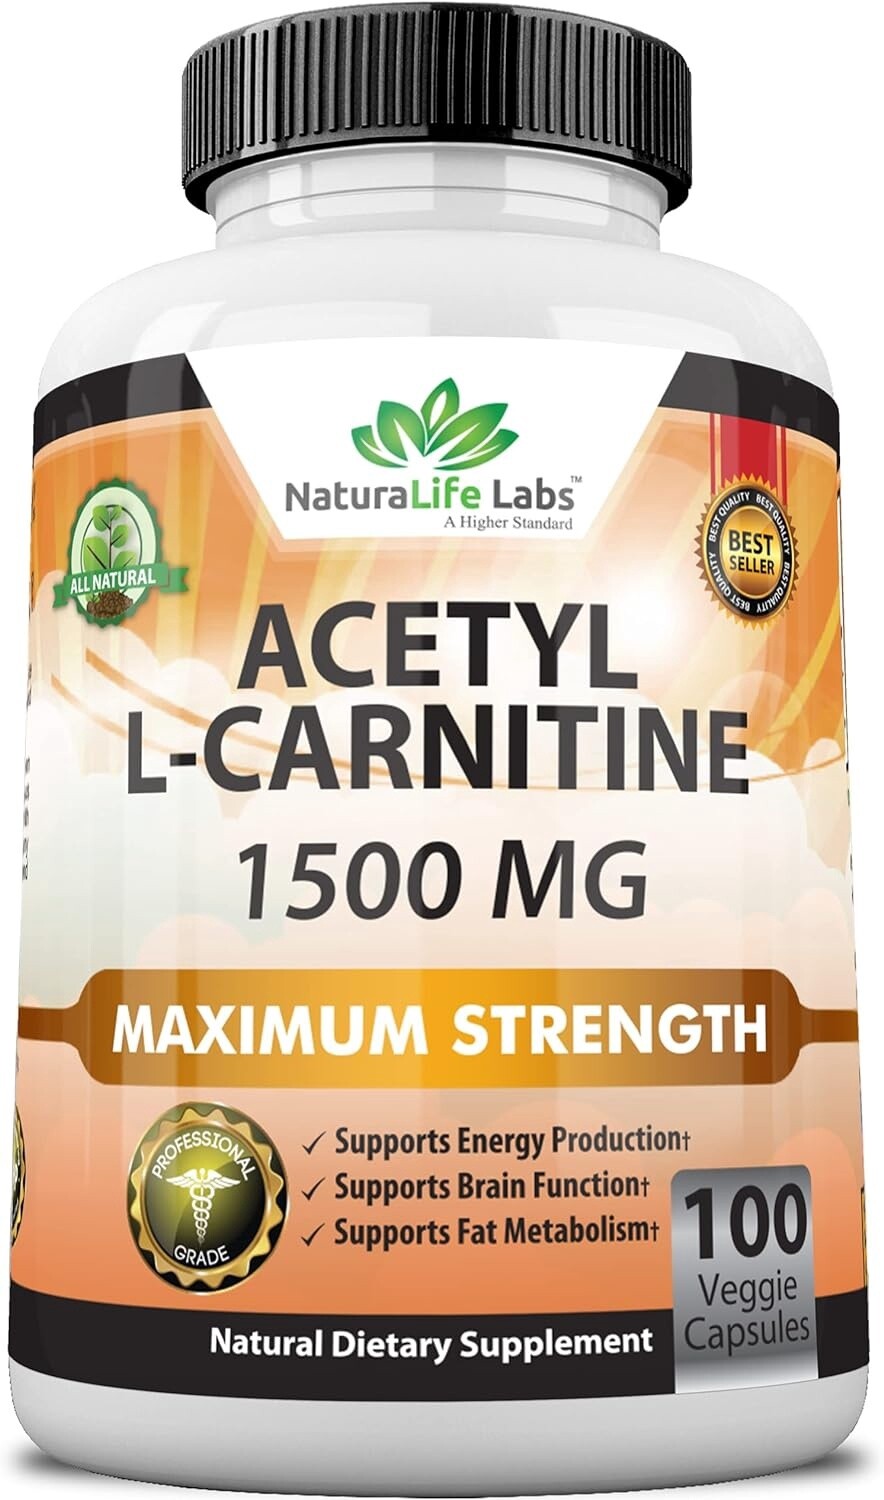 Natural Life Labs Acetyl L-Carnitine 1500 mg- 120 capsules